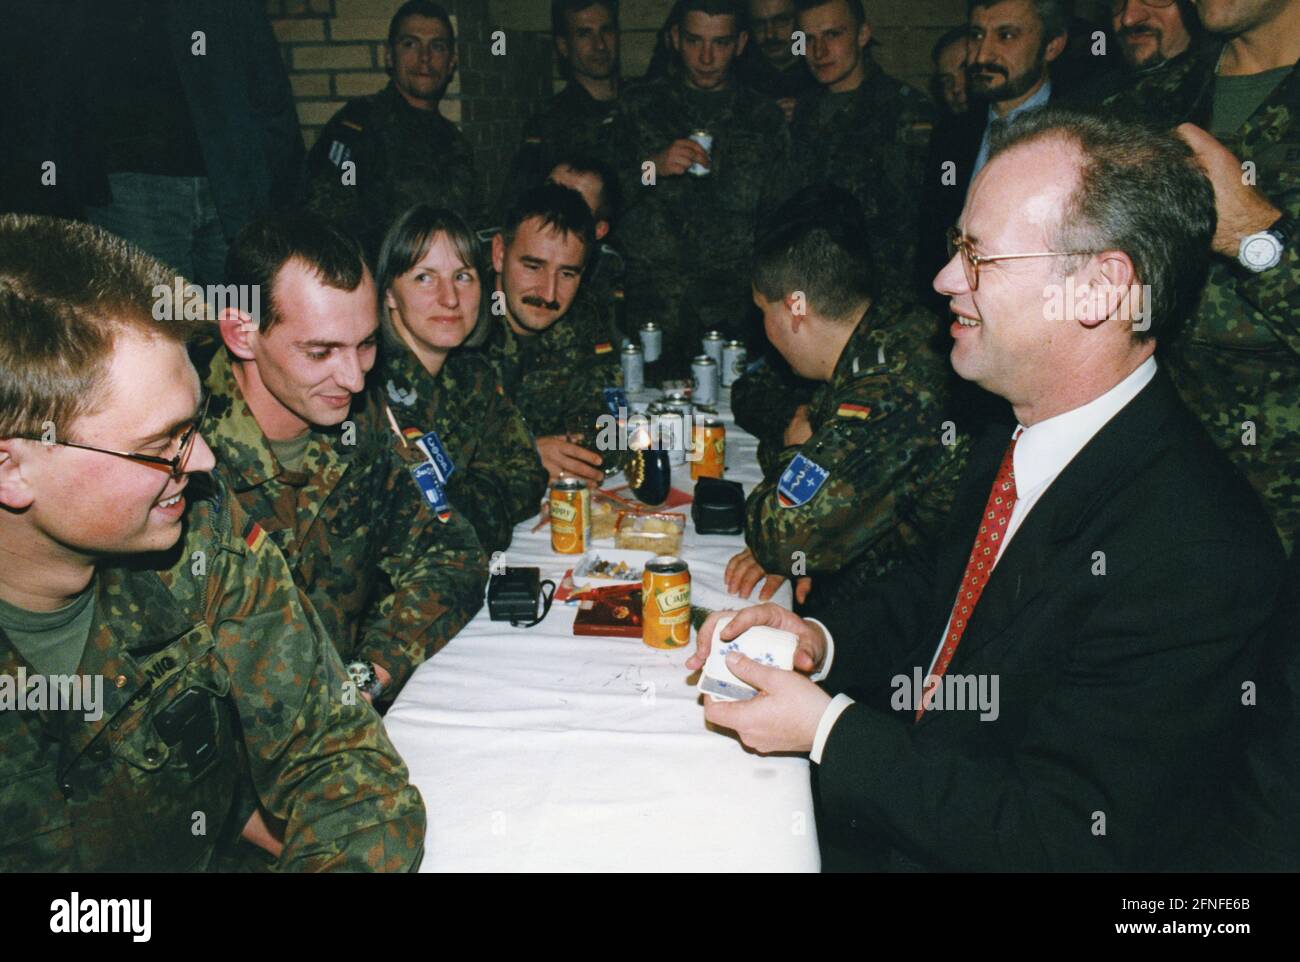 This photograph shows Federal Minister of Defence Rudolf Scharping (centre) with soldiers from the Rajlovac field camp in Sarajevo (Sarajevo). The troops stationed here belonged to the SFOR (stabilization force), which had the task of peacekeeping and stabilization after the Bosnian War. [automated translation] Stock Photo